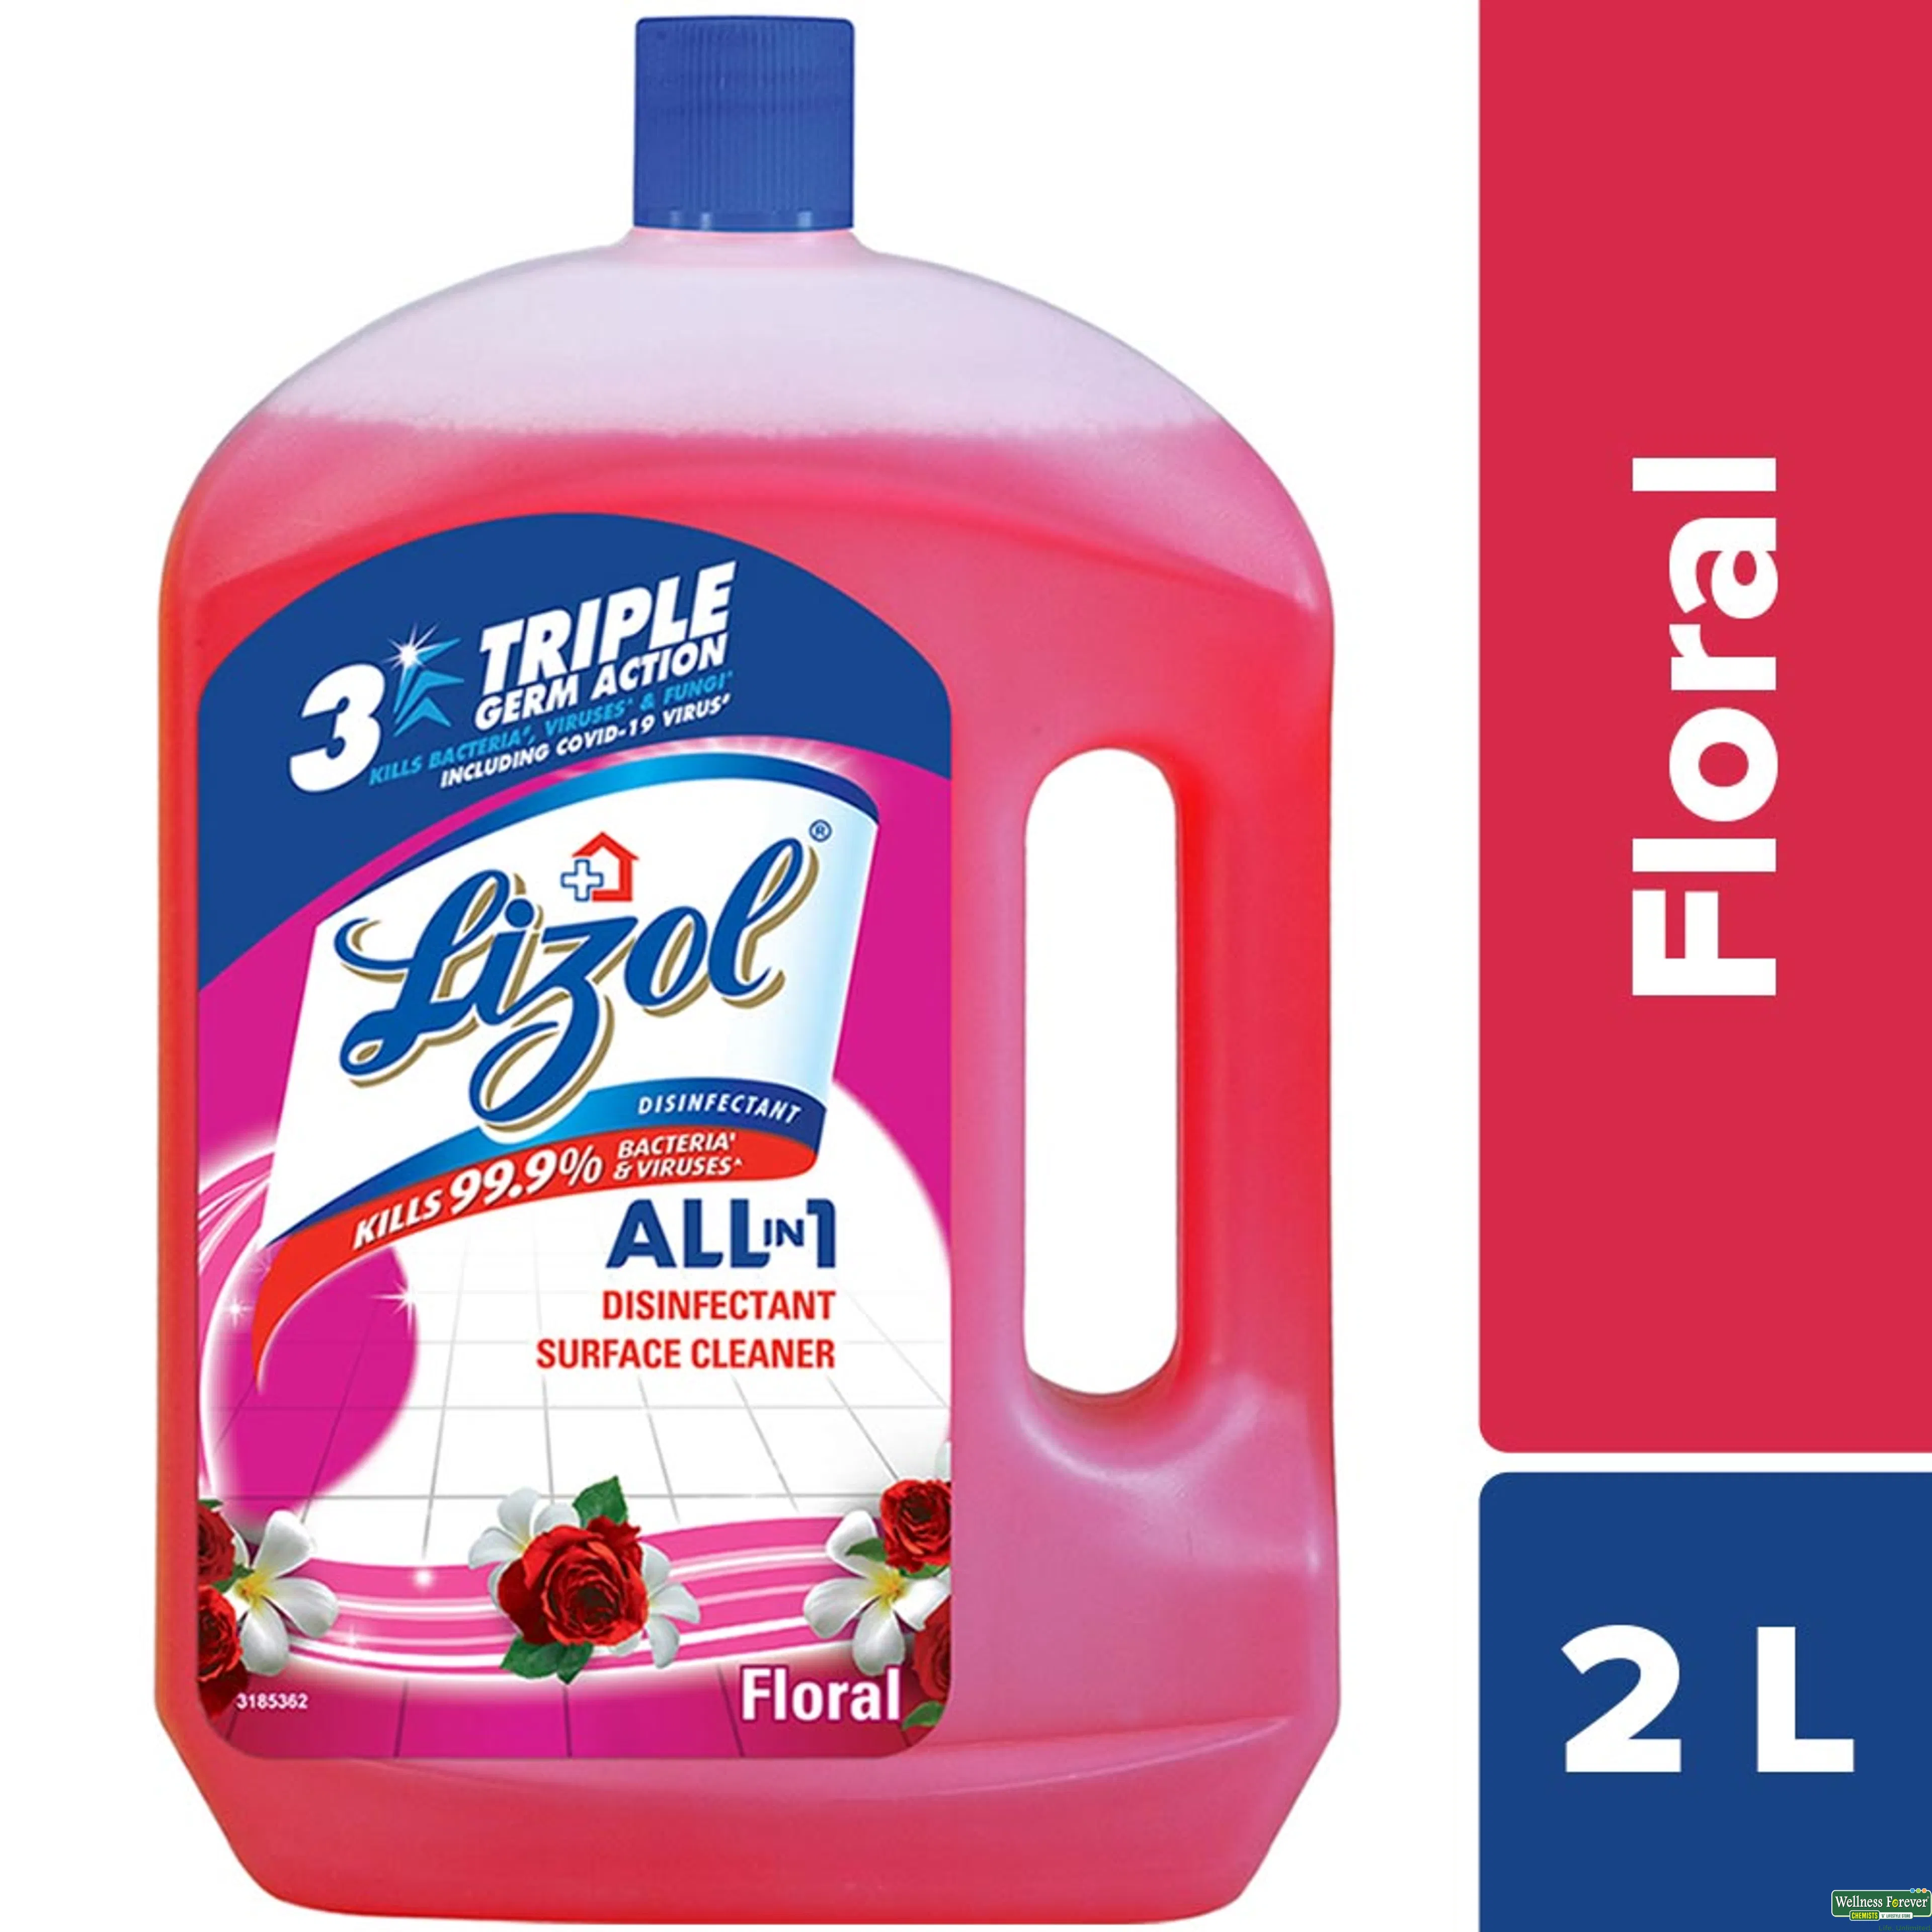 LIZOL DISINFECTANT SURFACE CLEANER FLORAL 2LTR-image